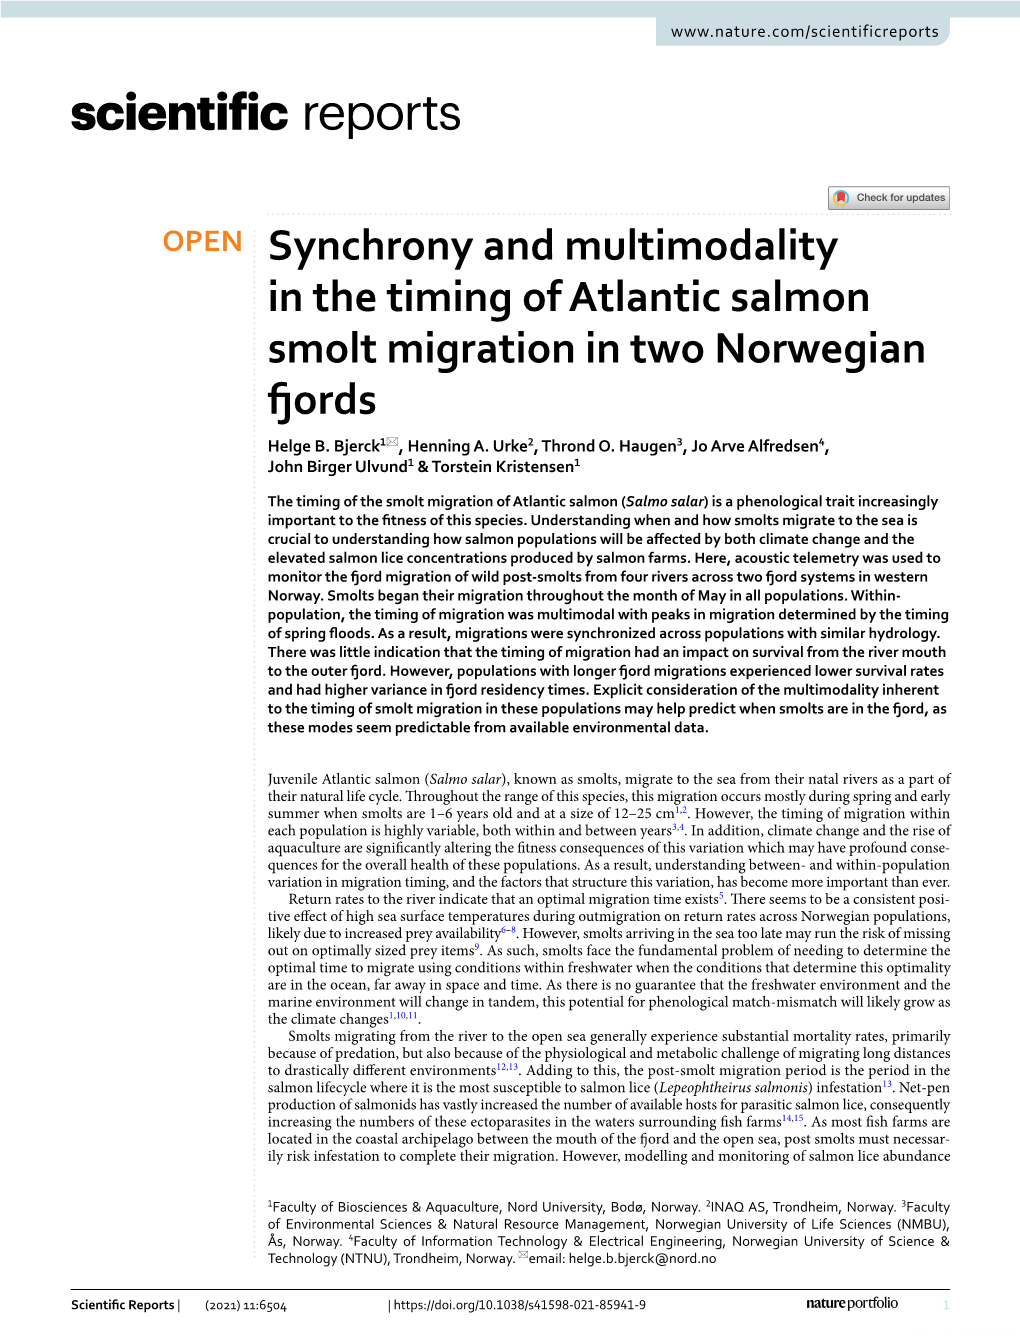 Synchrony and Multimodality in the Timing of Atlantic Salmon Smolt Migration in Two Norwegian Fords Helge B